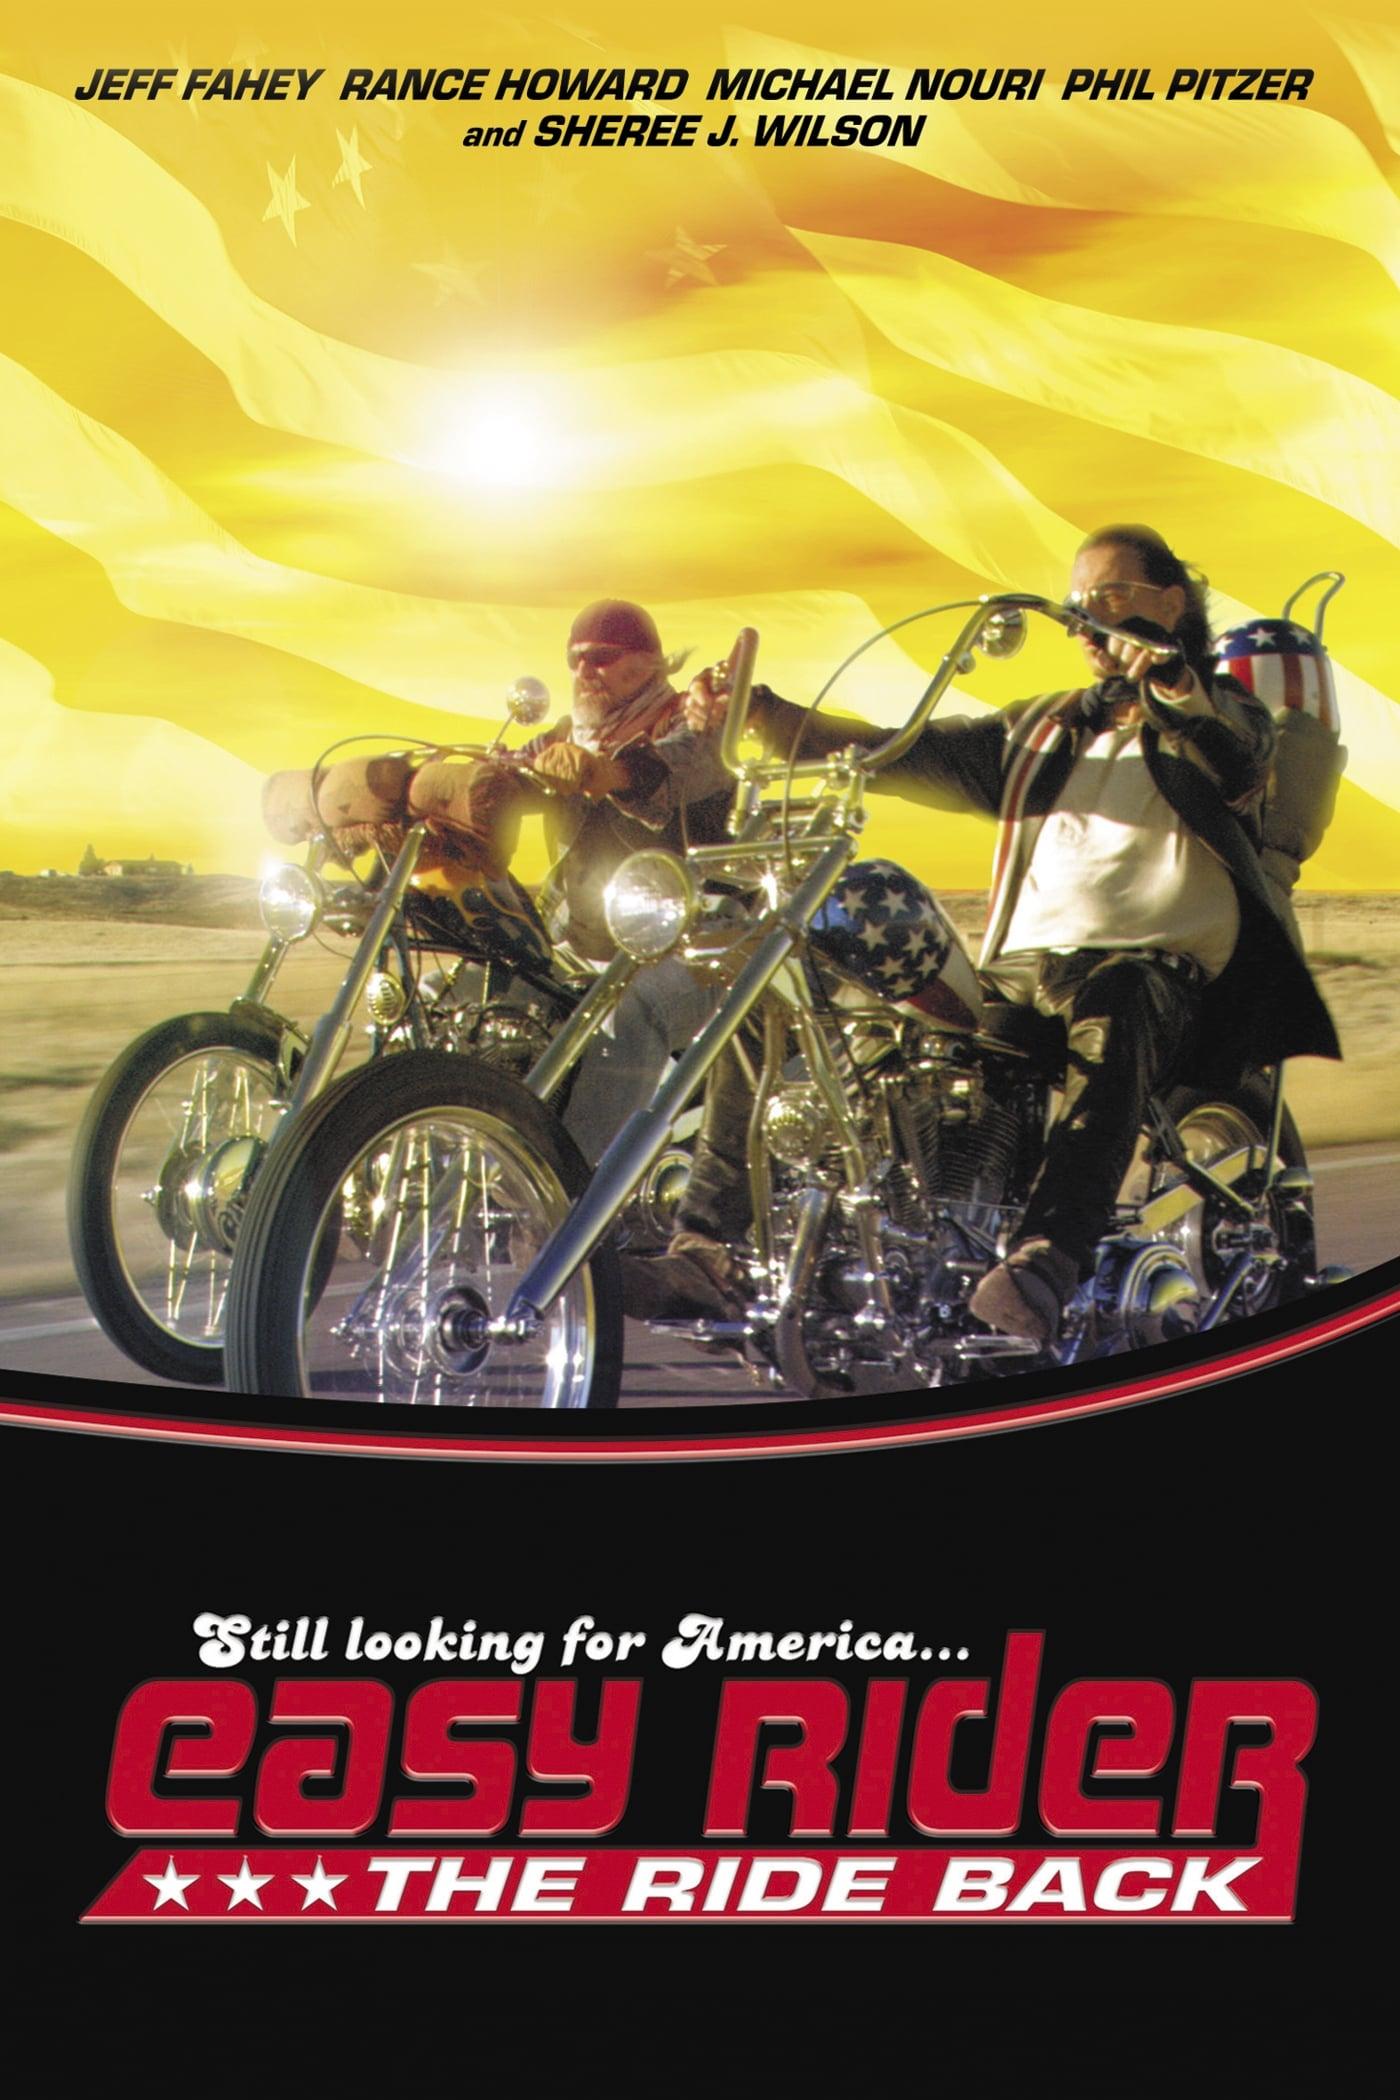 Easy Rider: The Ride Back poster